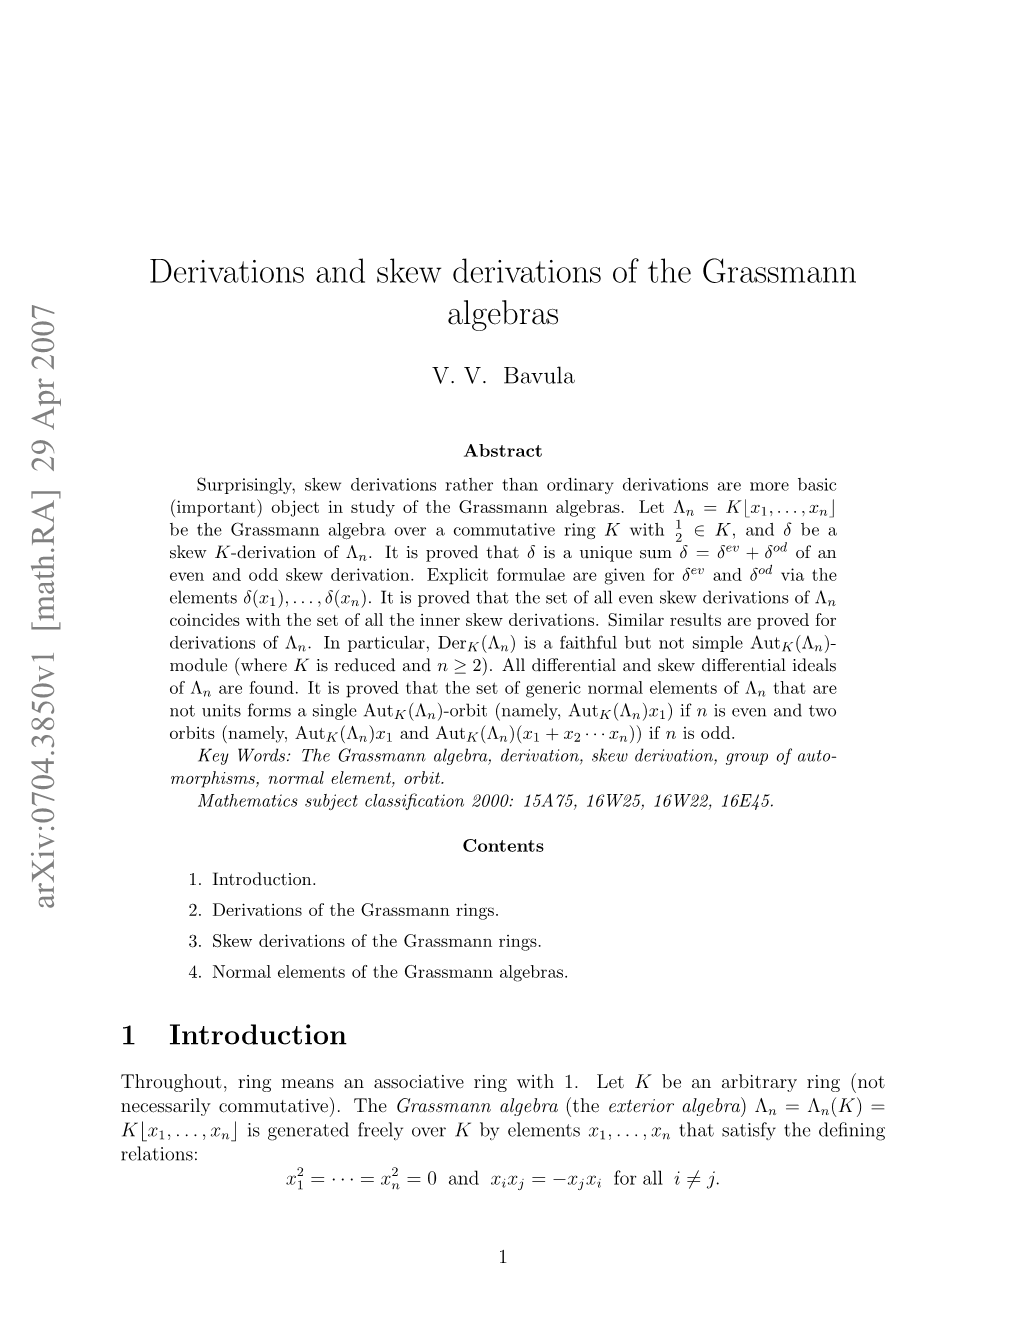 Derivations and Skew Derivations of the Grassmann Algebras